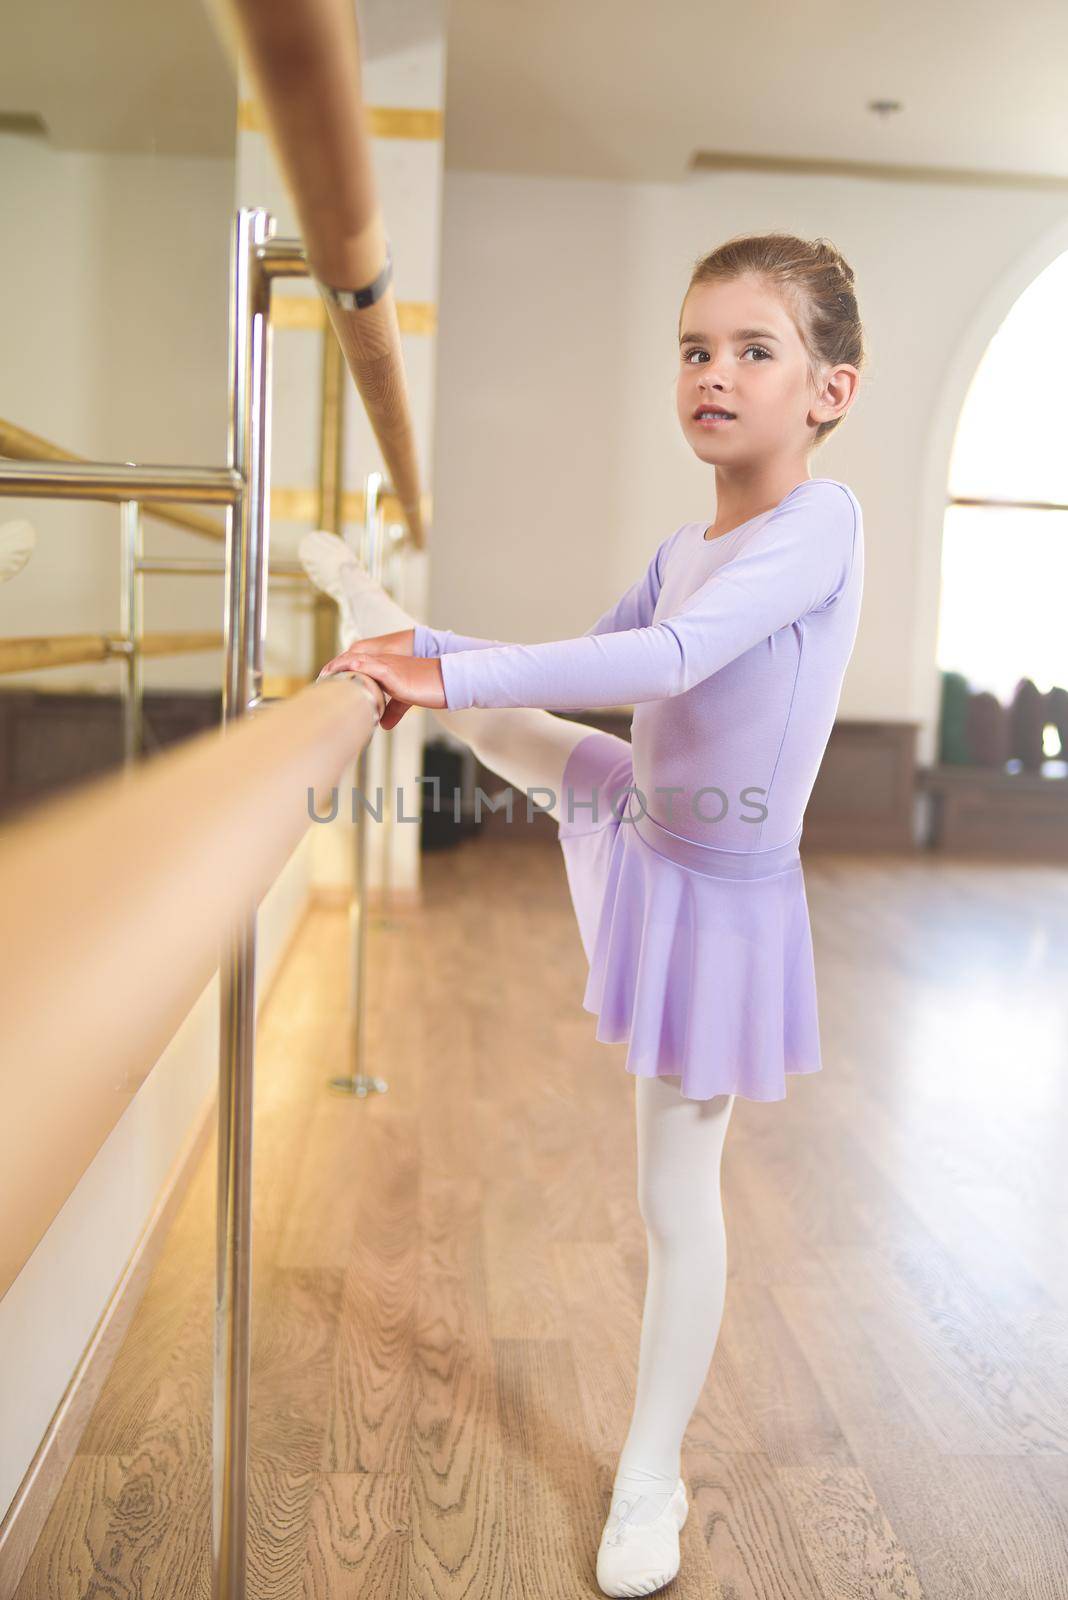 little girl wear pointe shoes in ballet class near frame and large mirror doing exercises and stretching by Nickstock